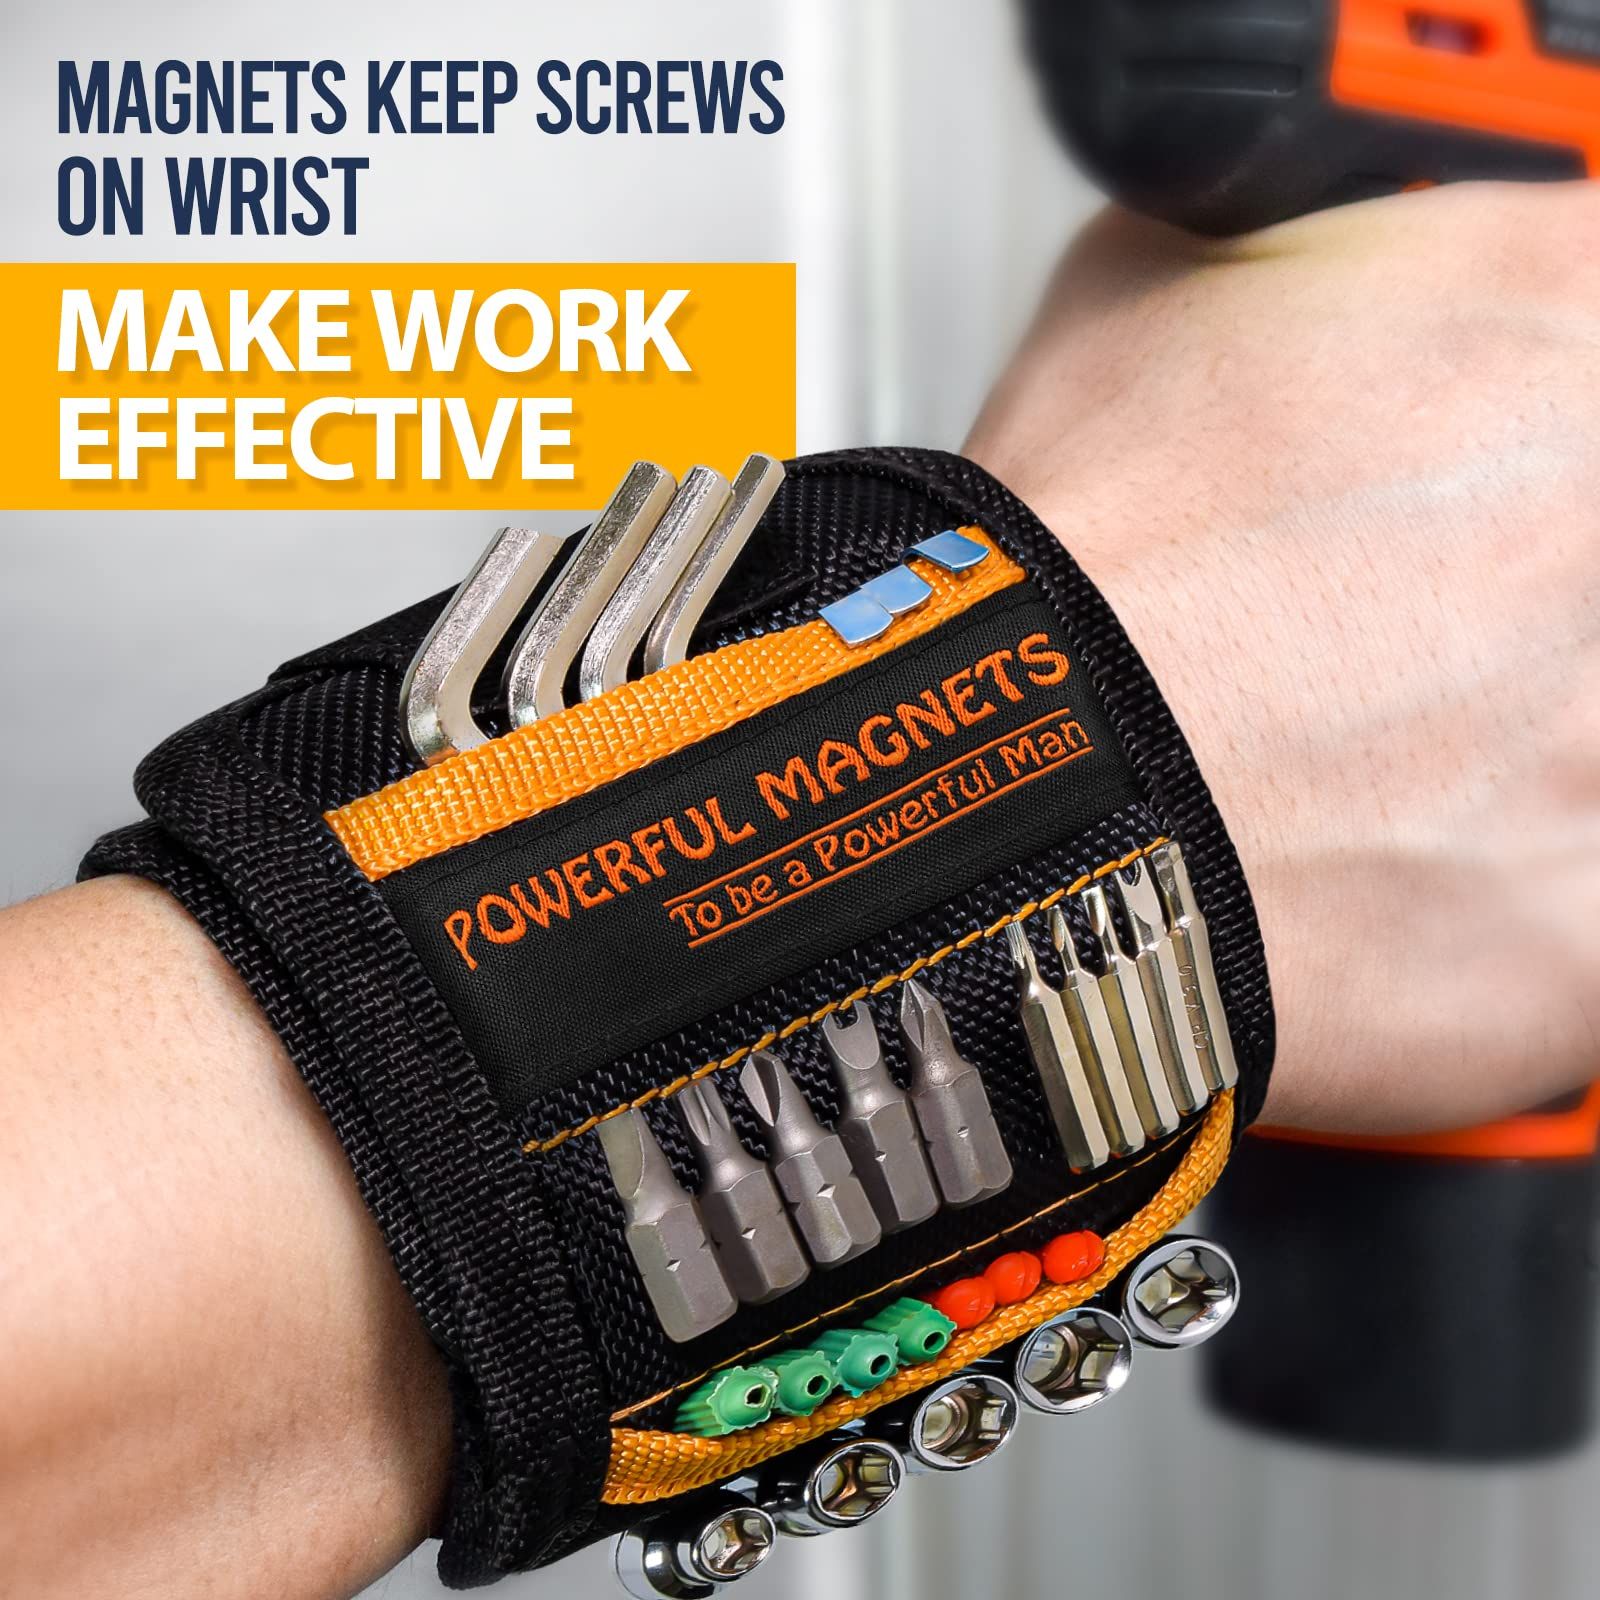 Tool Gifts for Men Stocking Stuffers - Magnetic Wristband for Holding Screws, Wrist Magnet, Gifts fo | Amazon (US)